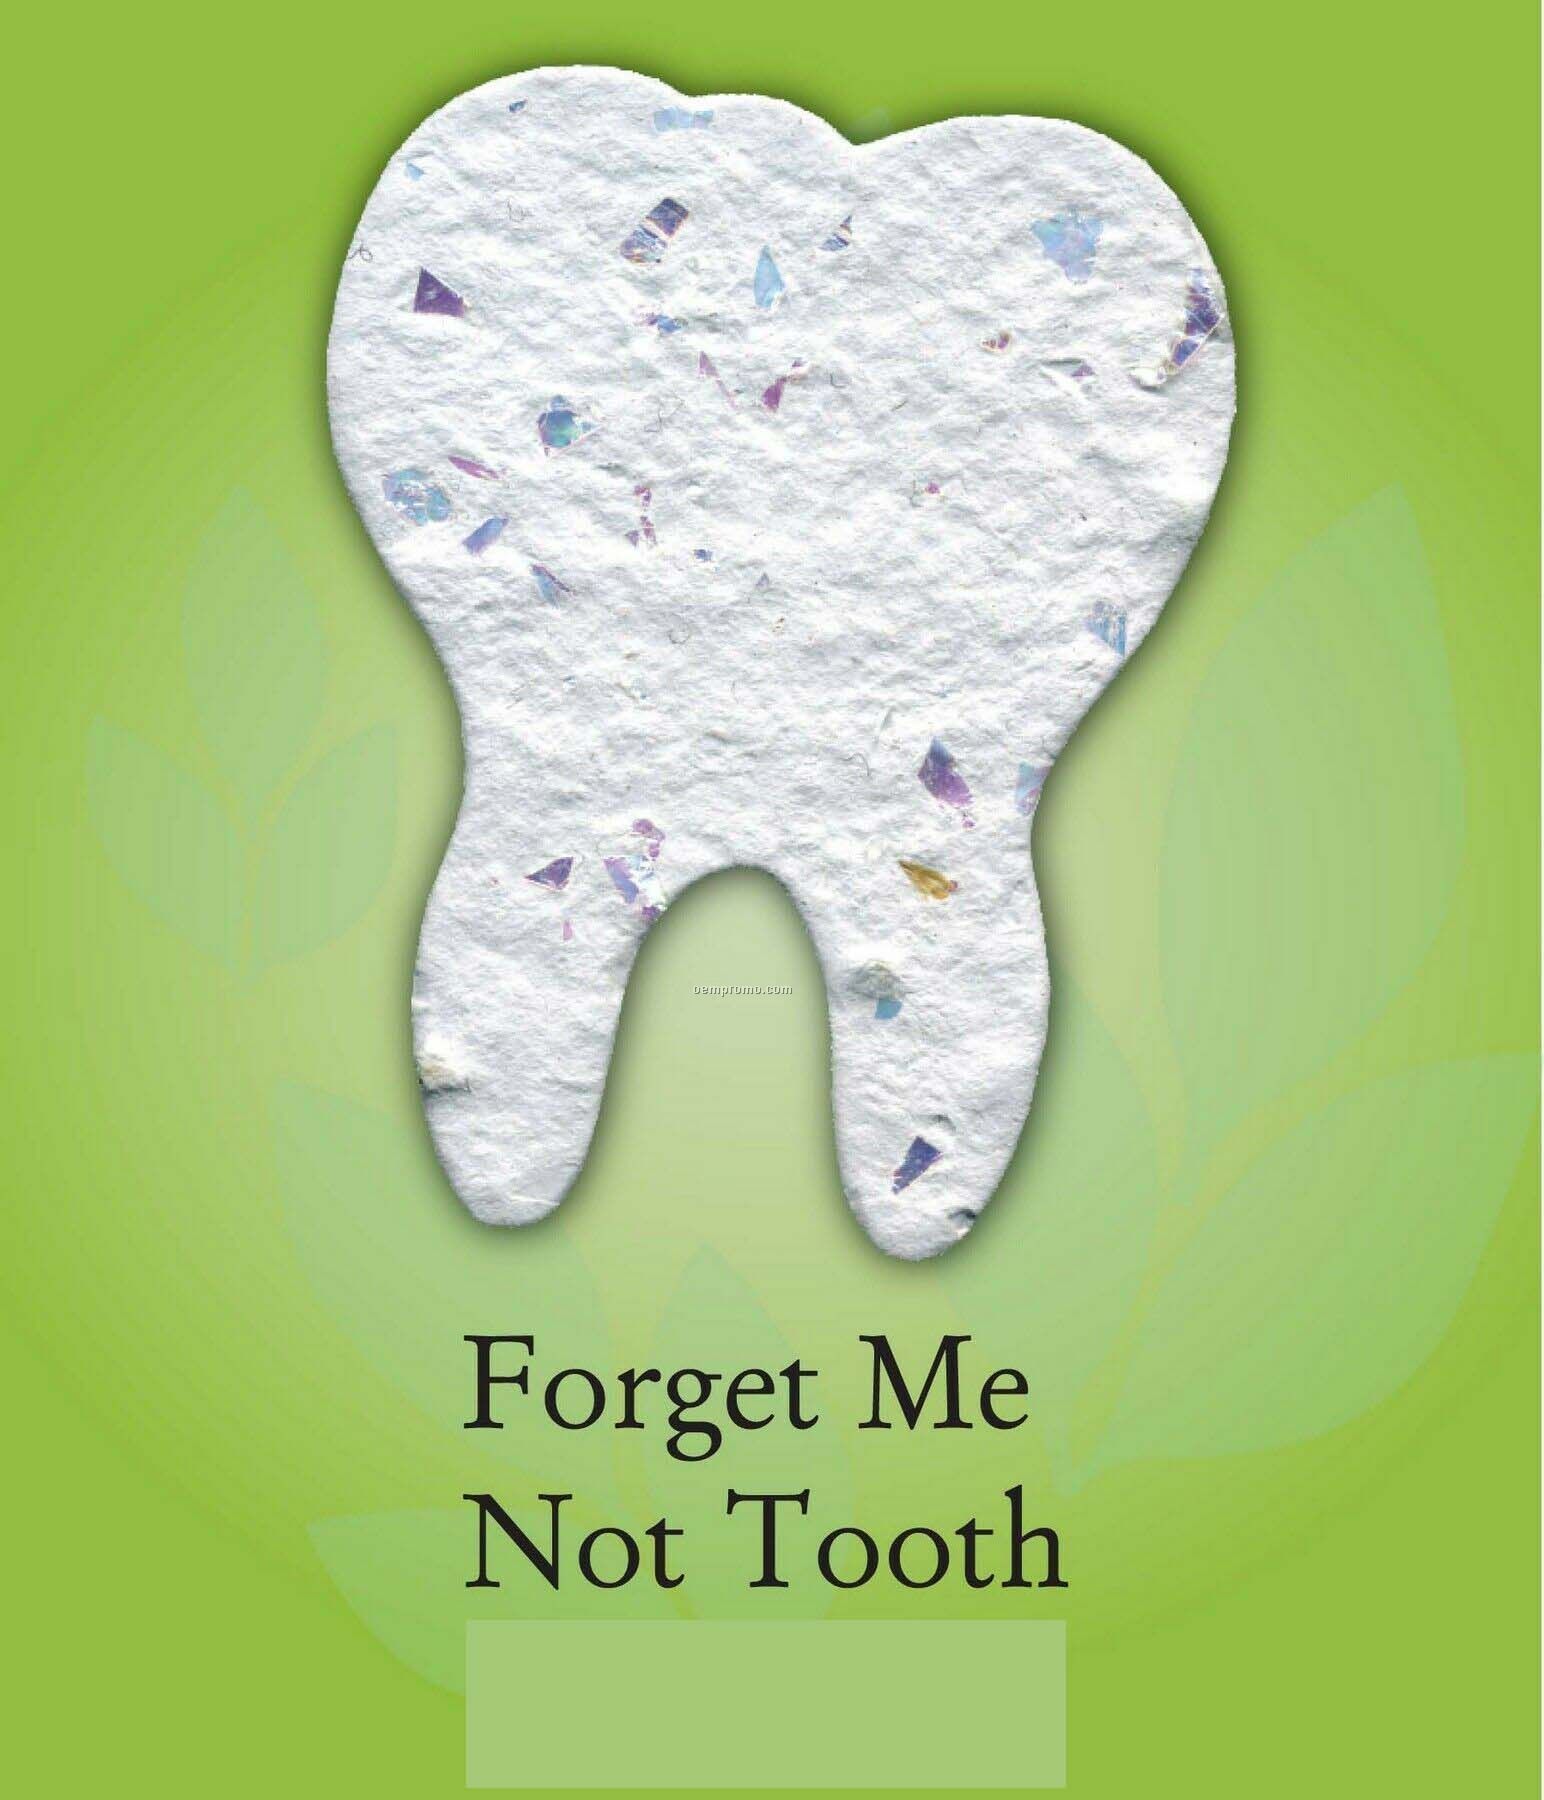 Forget Me Not Tooth Ornament With Embedded Seed